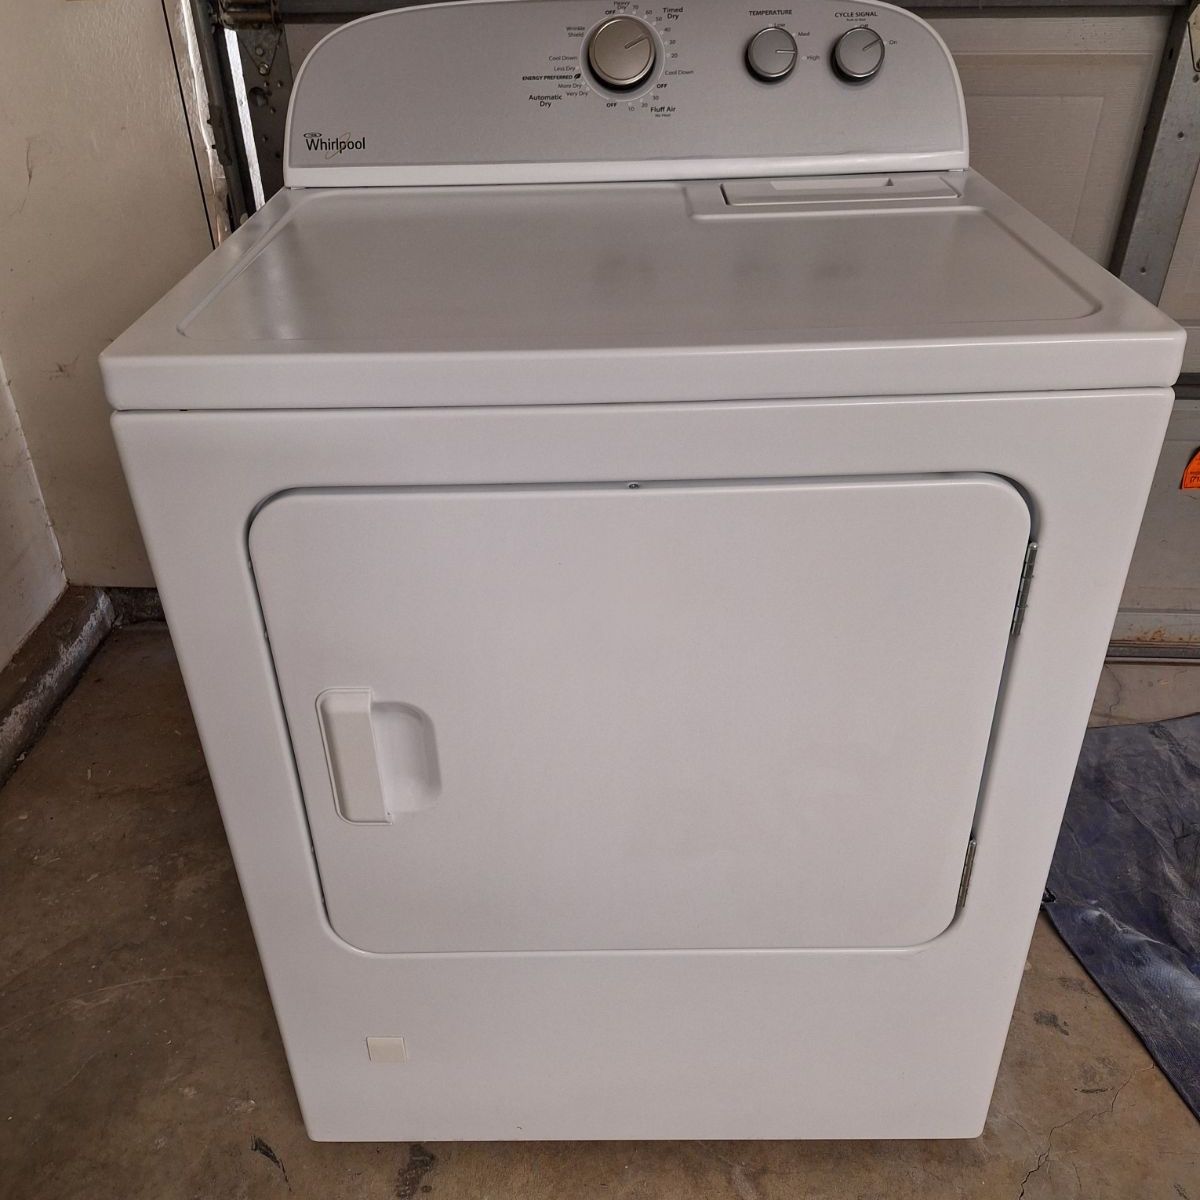 WHIRLPOOL GAS DRYER $220 DELIVERED AND INSTALLED 90 DAY WARRANTY 